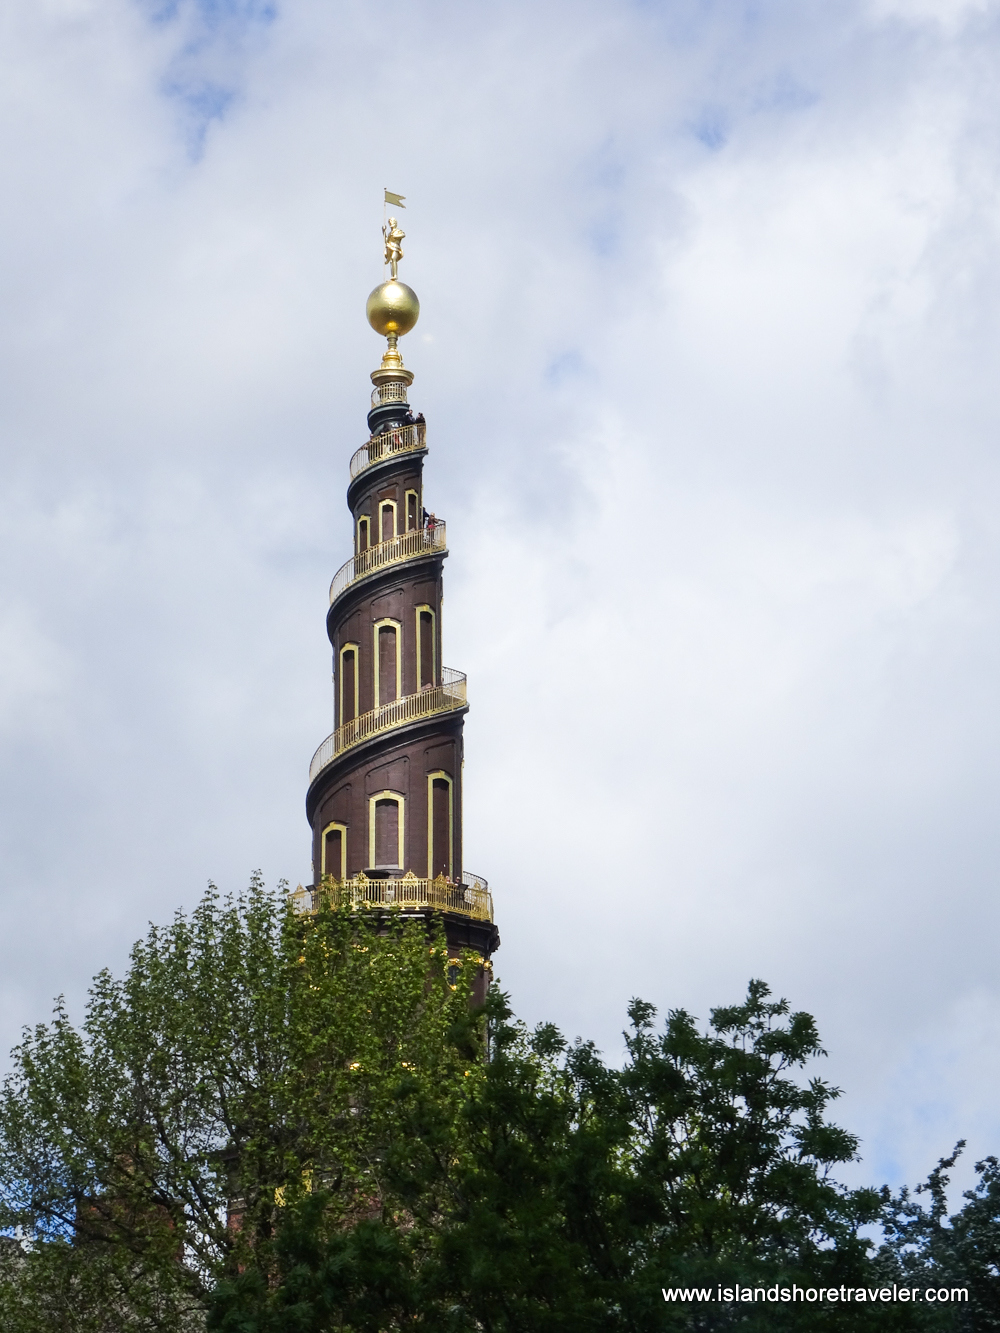 Helix Spire with external winding staircase on the Church of our Saviour in Copenhagen